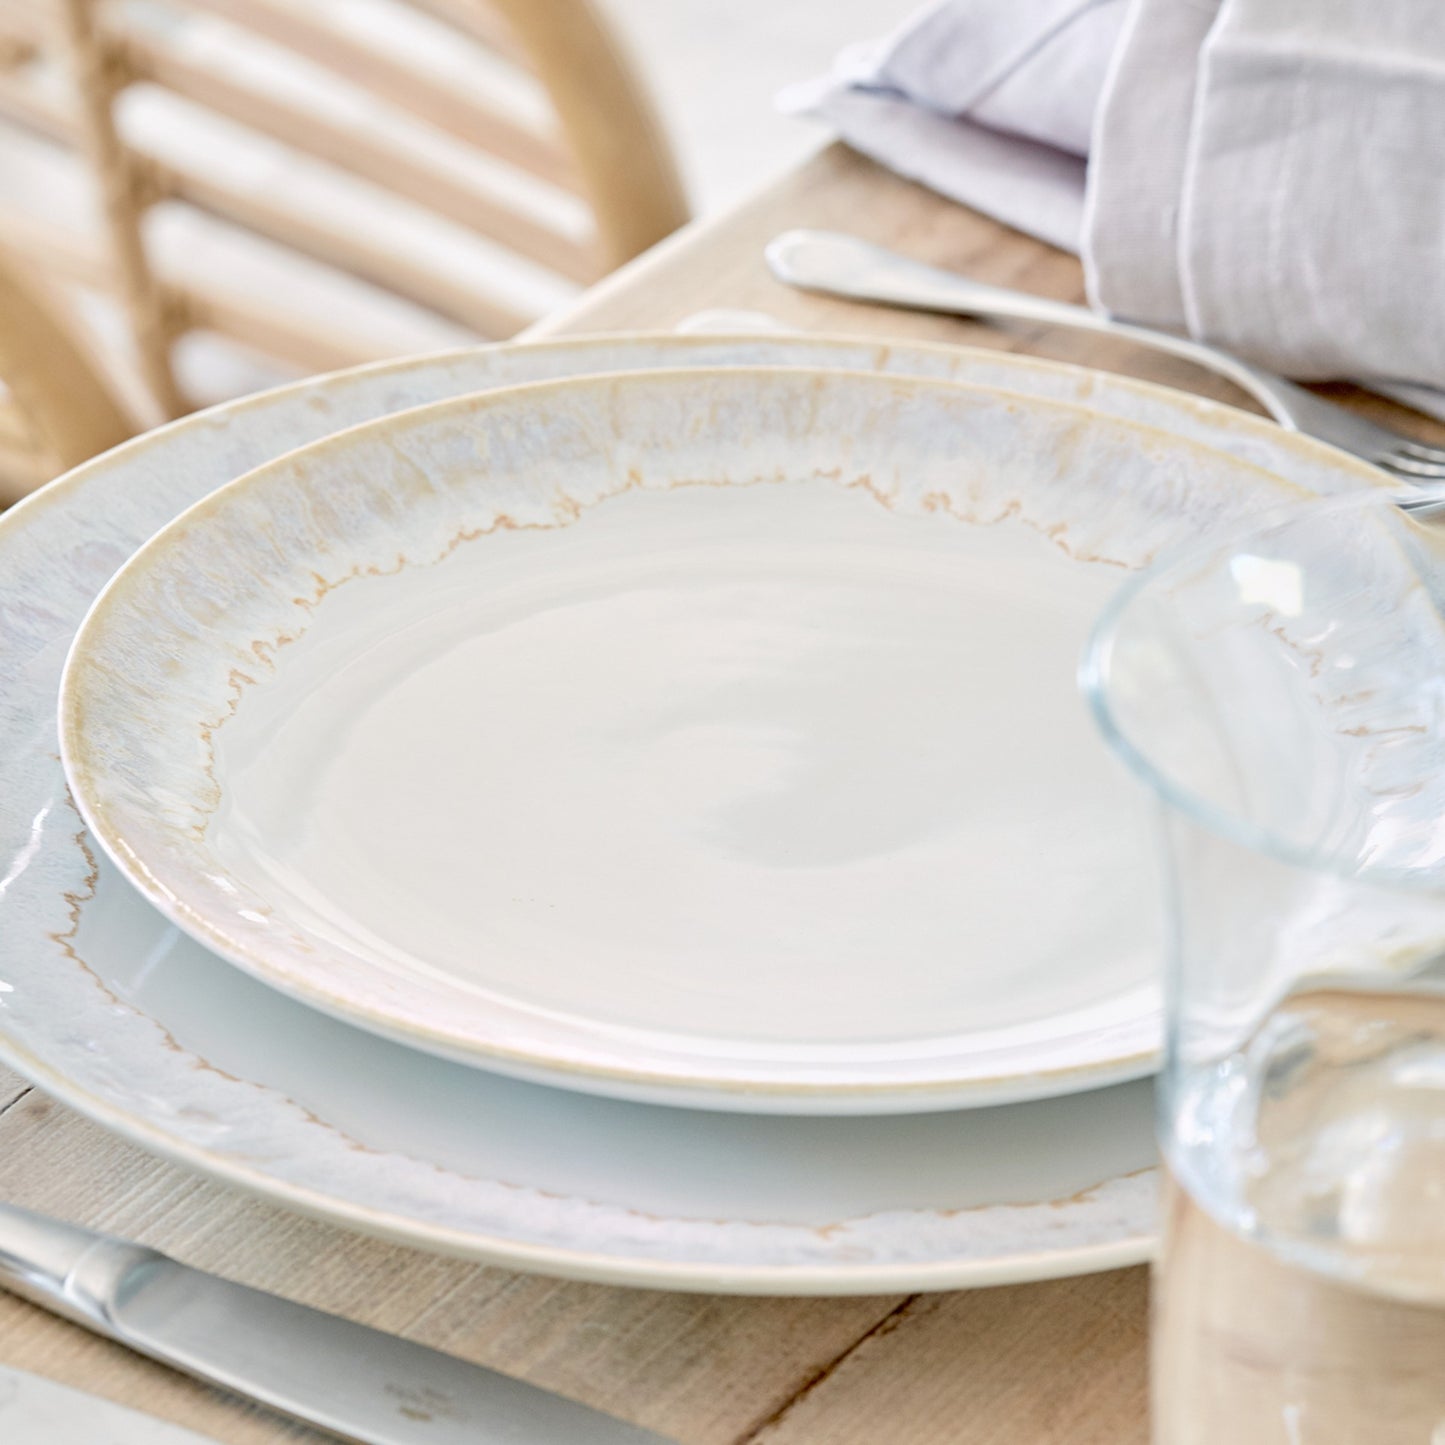 Taormina by Casafina Place Settings (sold separately)